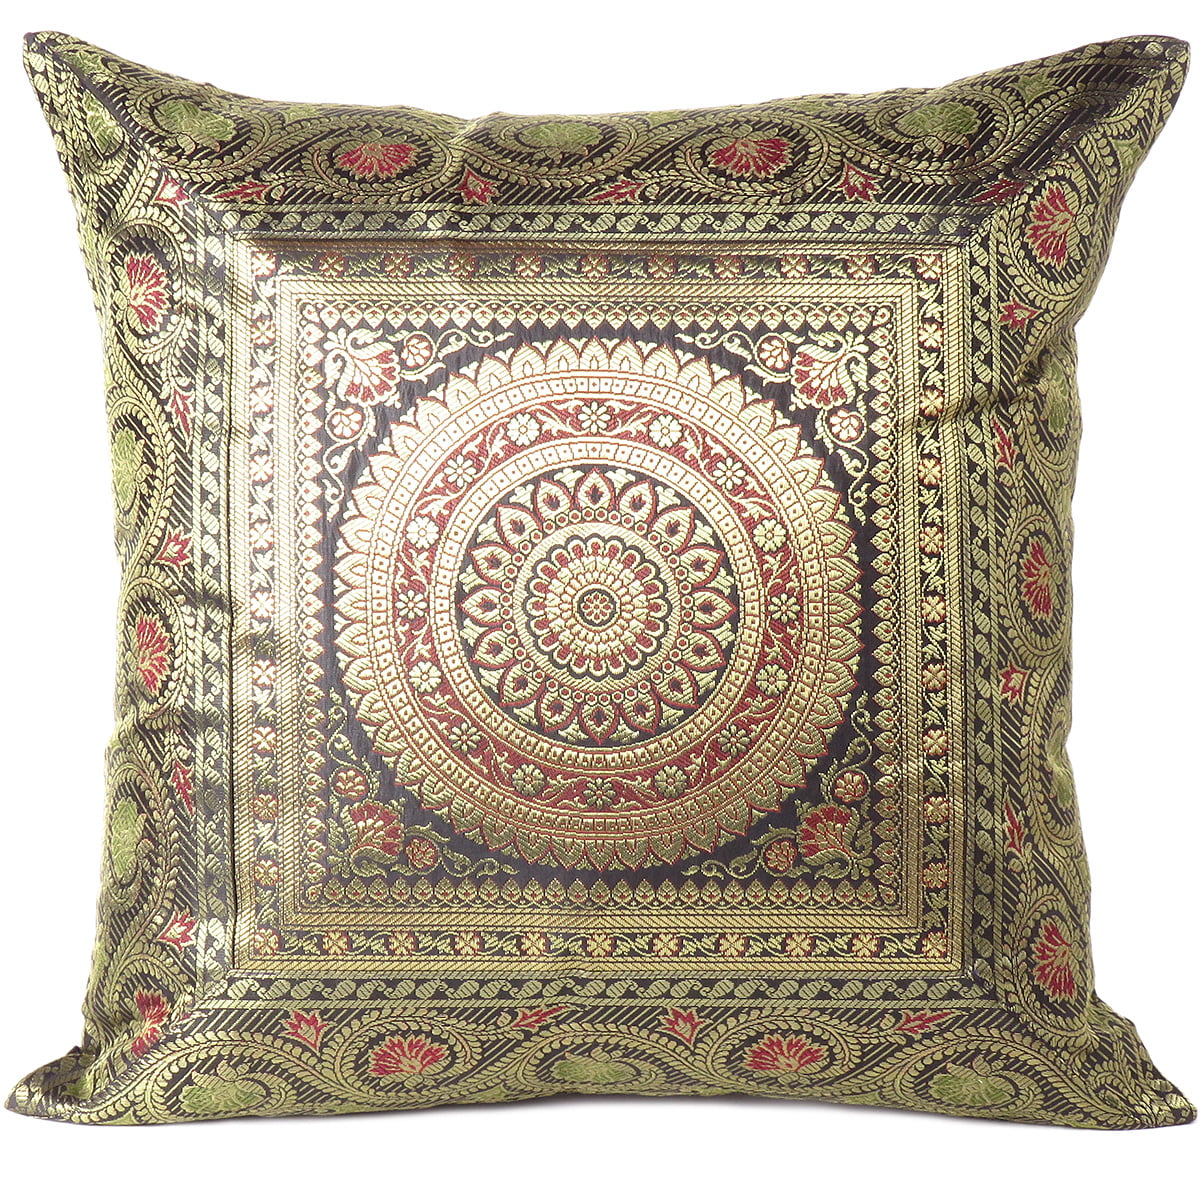 16" Round Cushion Pillow Cover Patchwork Sofa Floor Throw Indian Ethnic Decor 